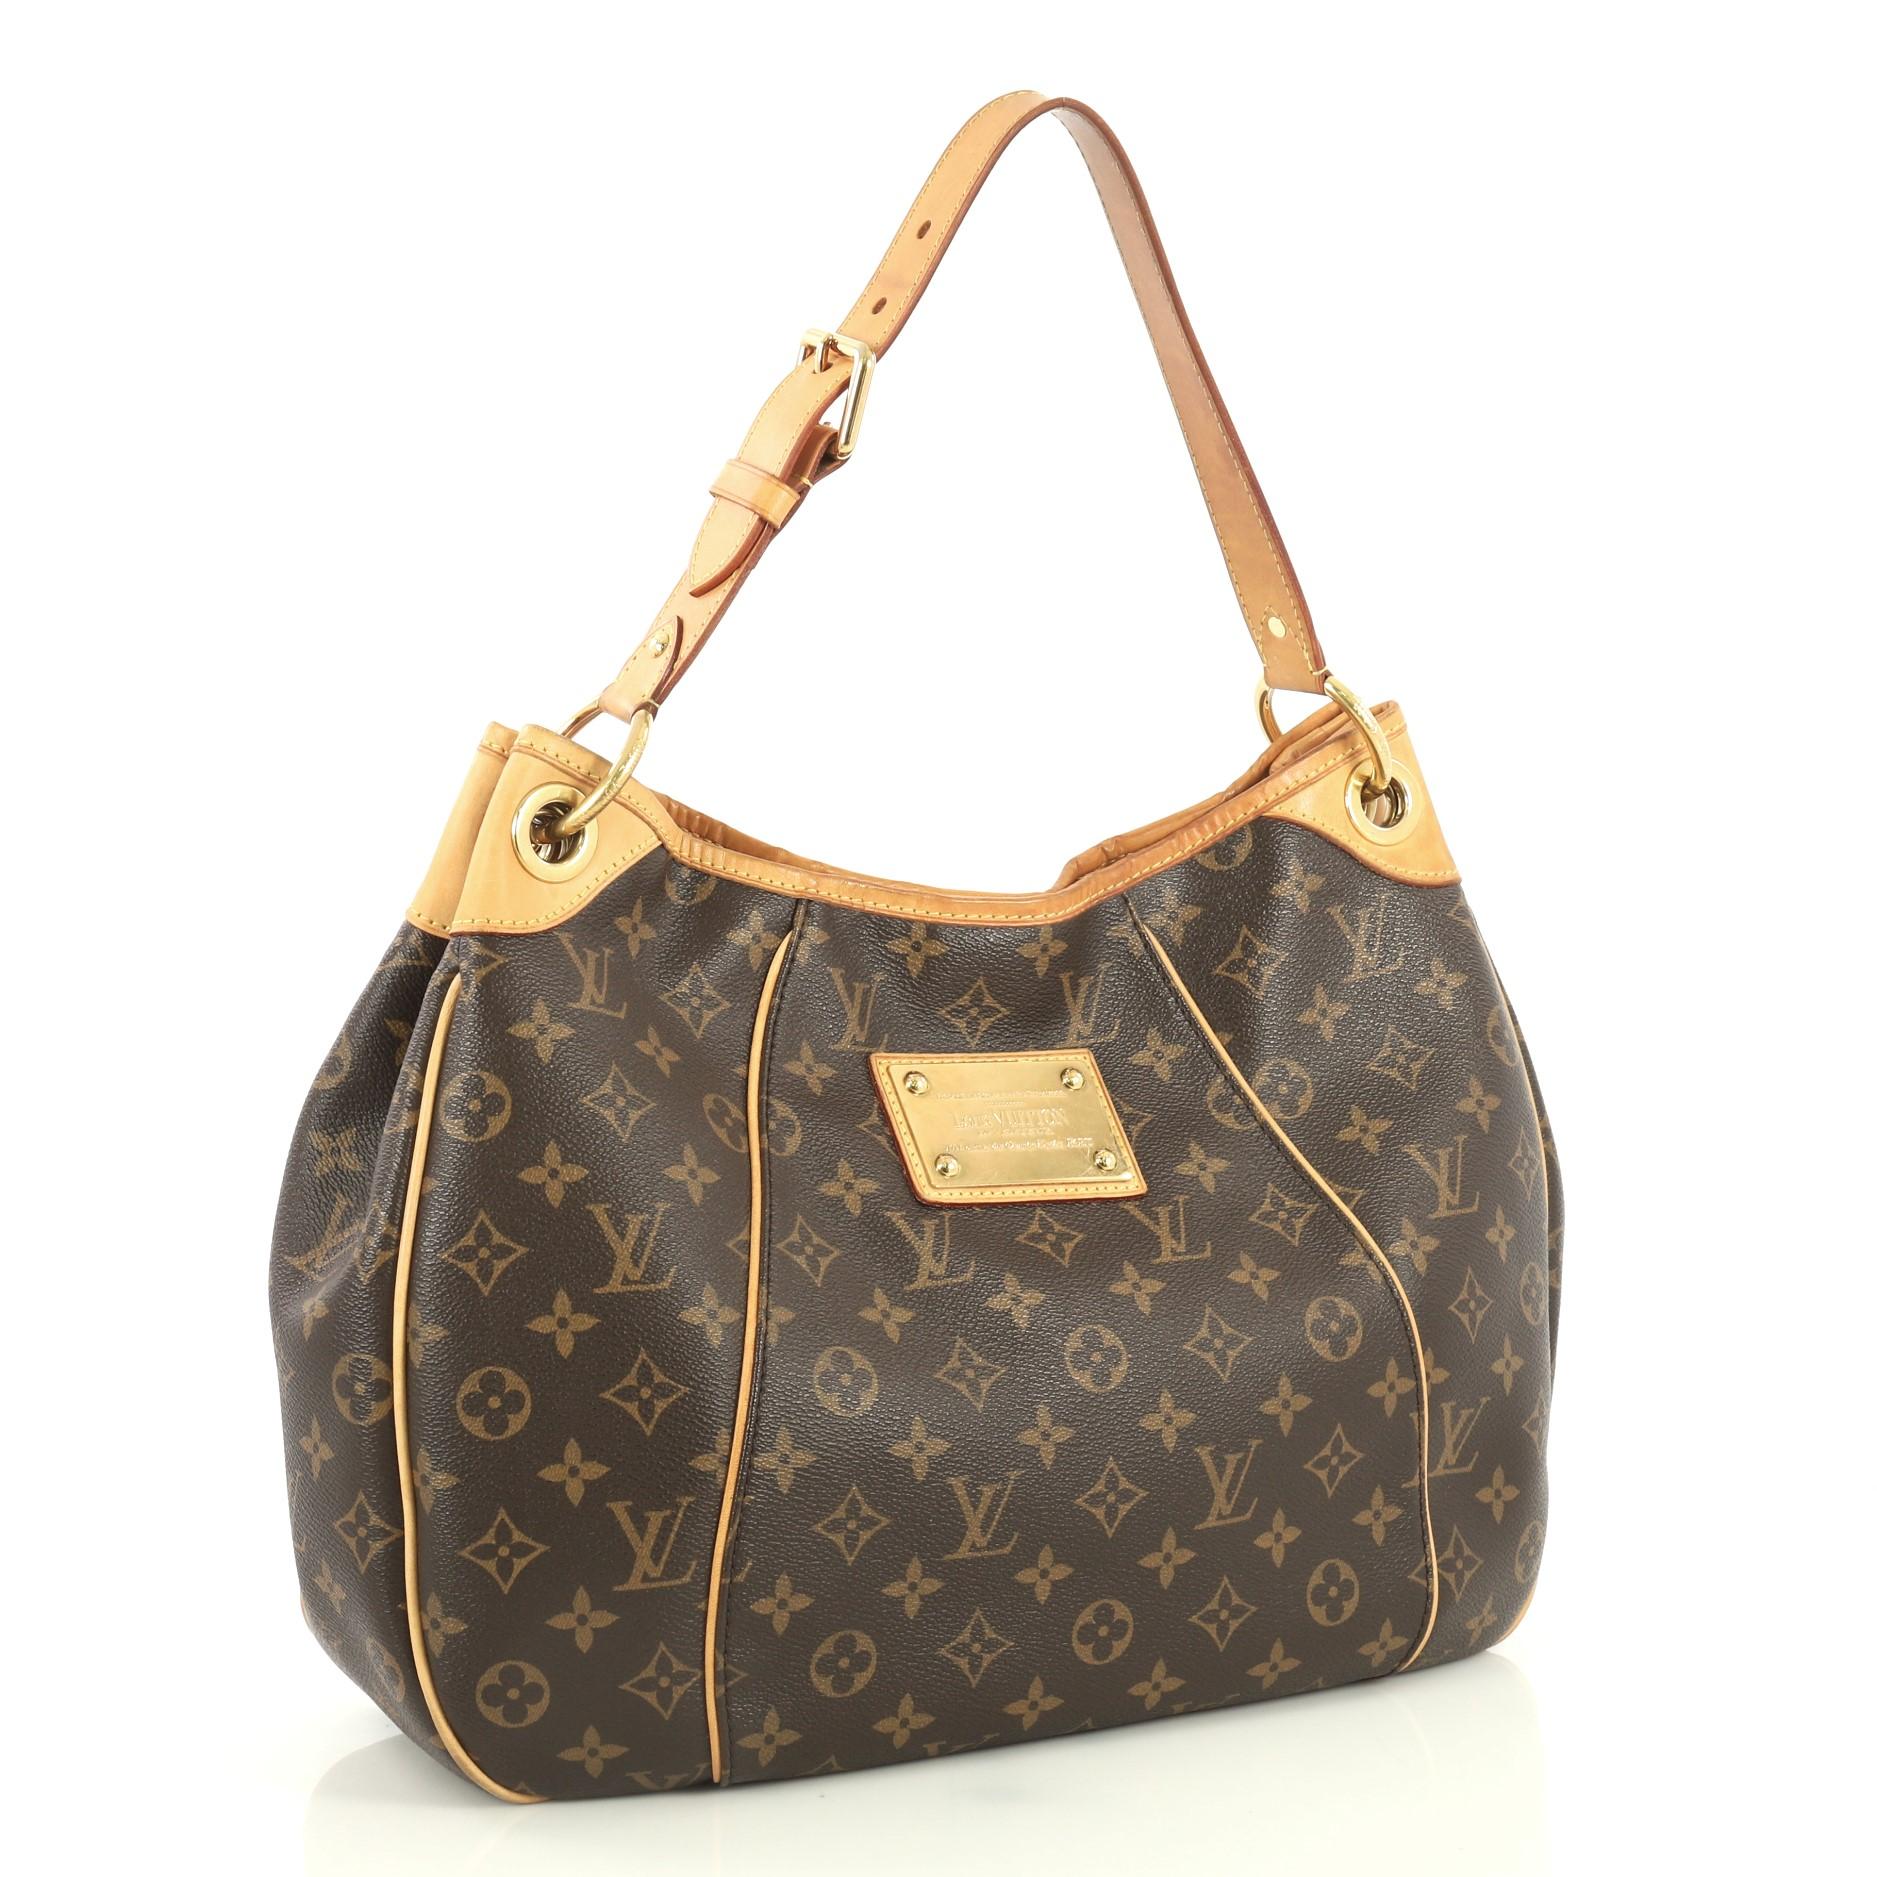 This Louis Vuitton Galliera Handbag Monogram Canvas PM, crafted in brown monogram coated canvas, features an adjustable shoulder strap, cowhide leather trim, and gold-tone hardware. Its magnetic snap closure opens to a neutral microfiber interior